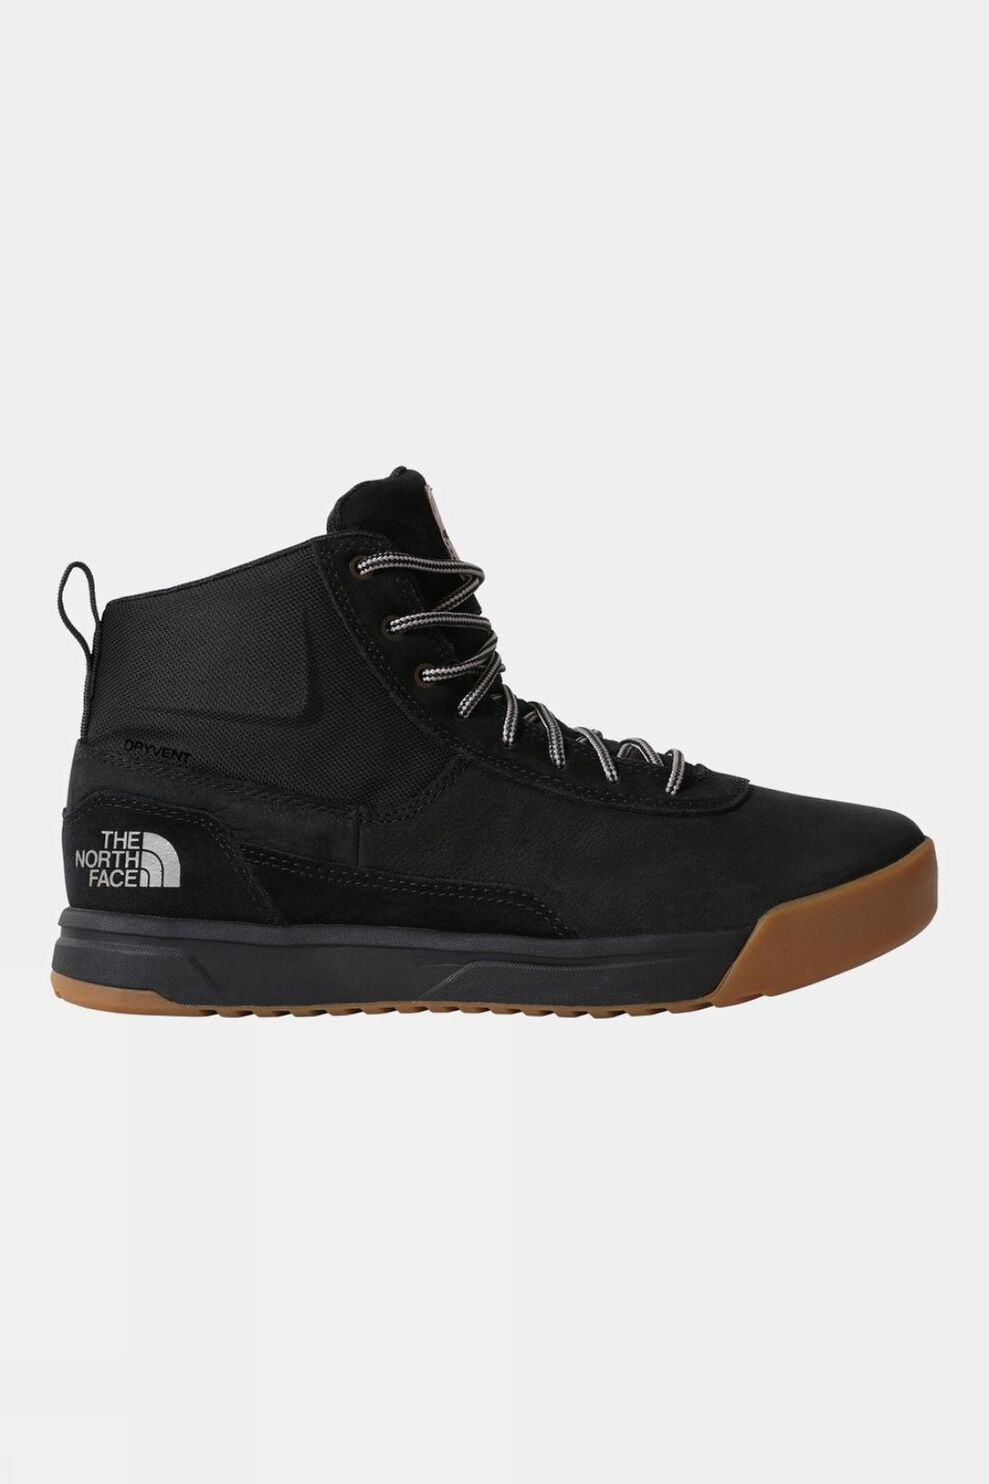 The North Face Mens Larimer Waterproof Street Boots